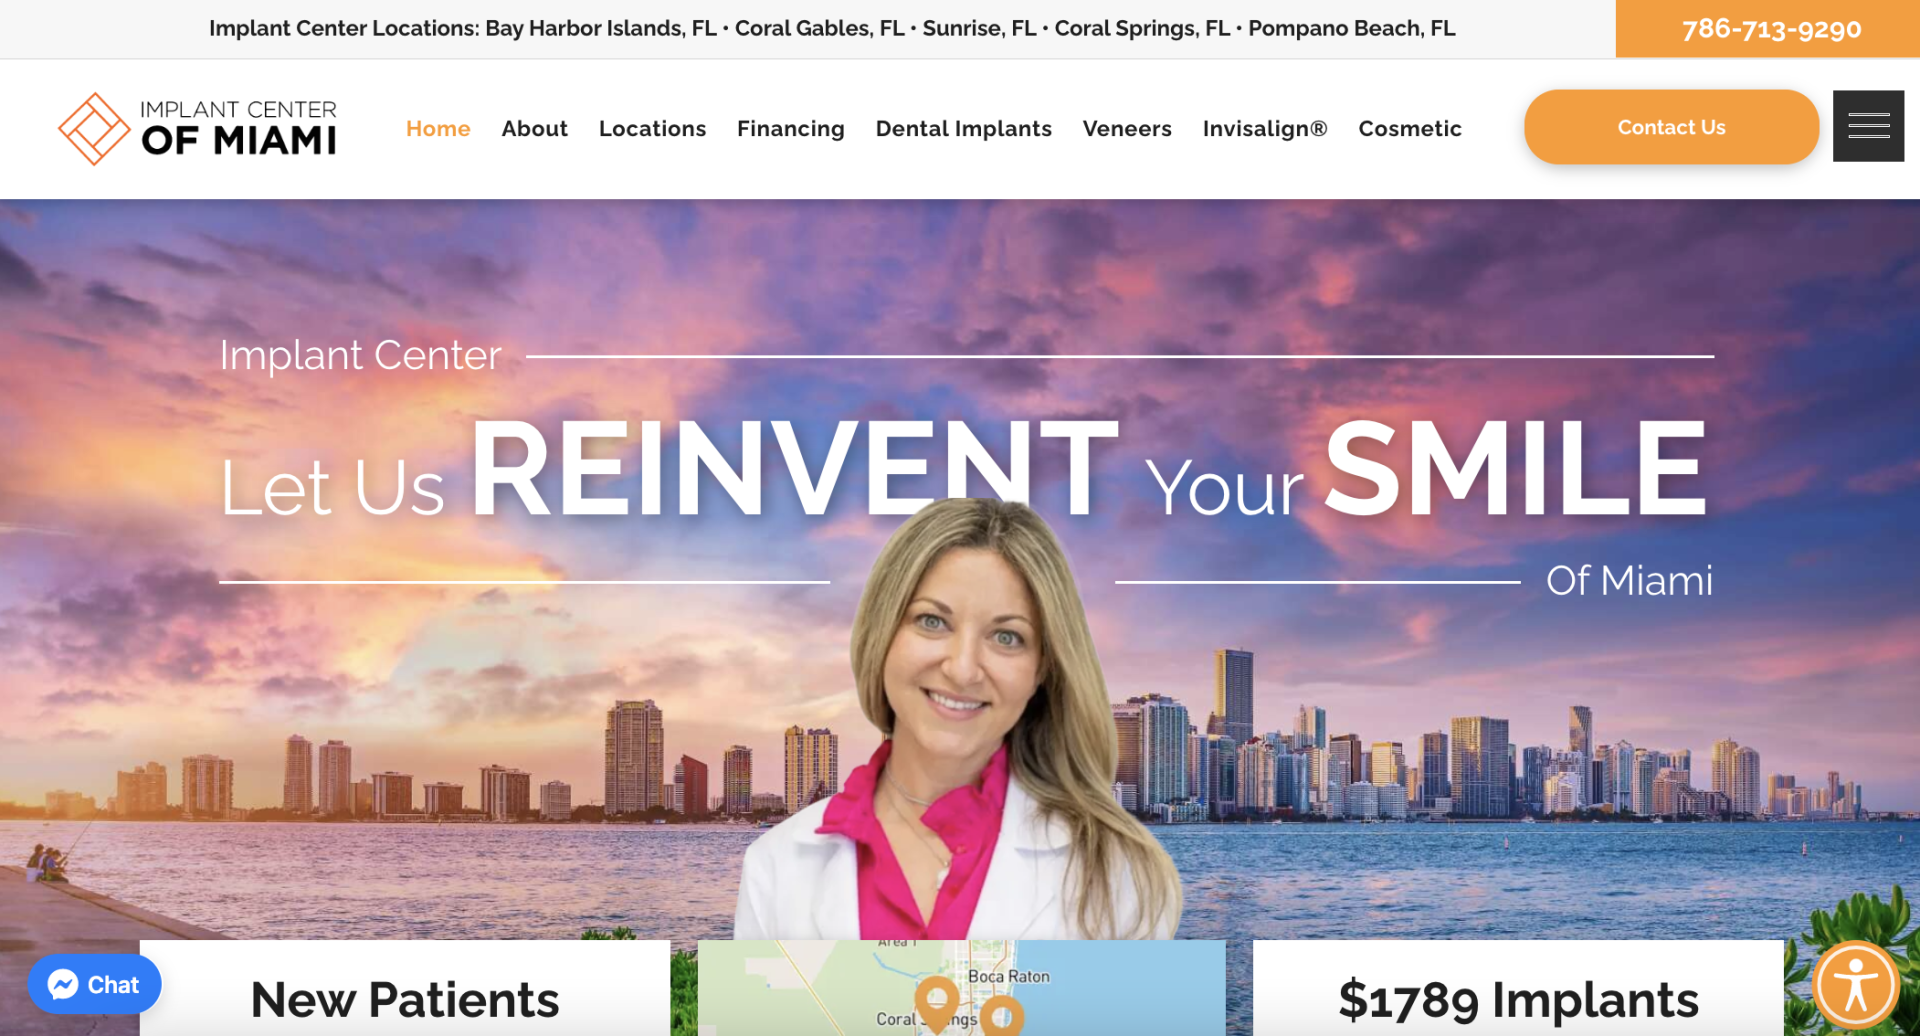 Screenshot of the homepage of Implant Center of Miami